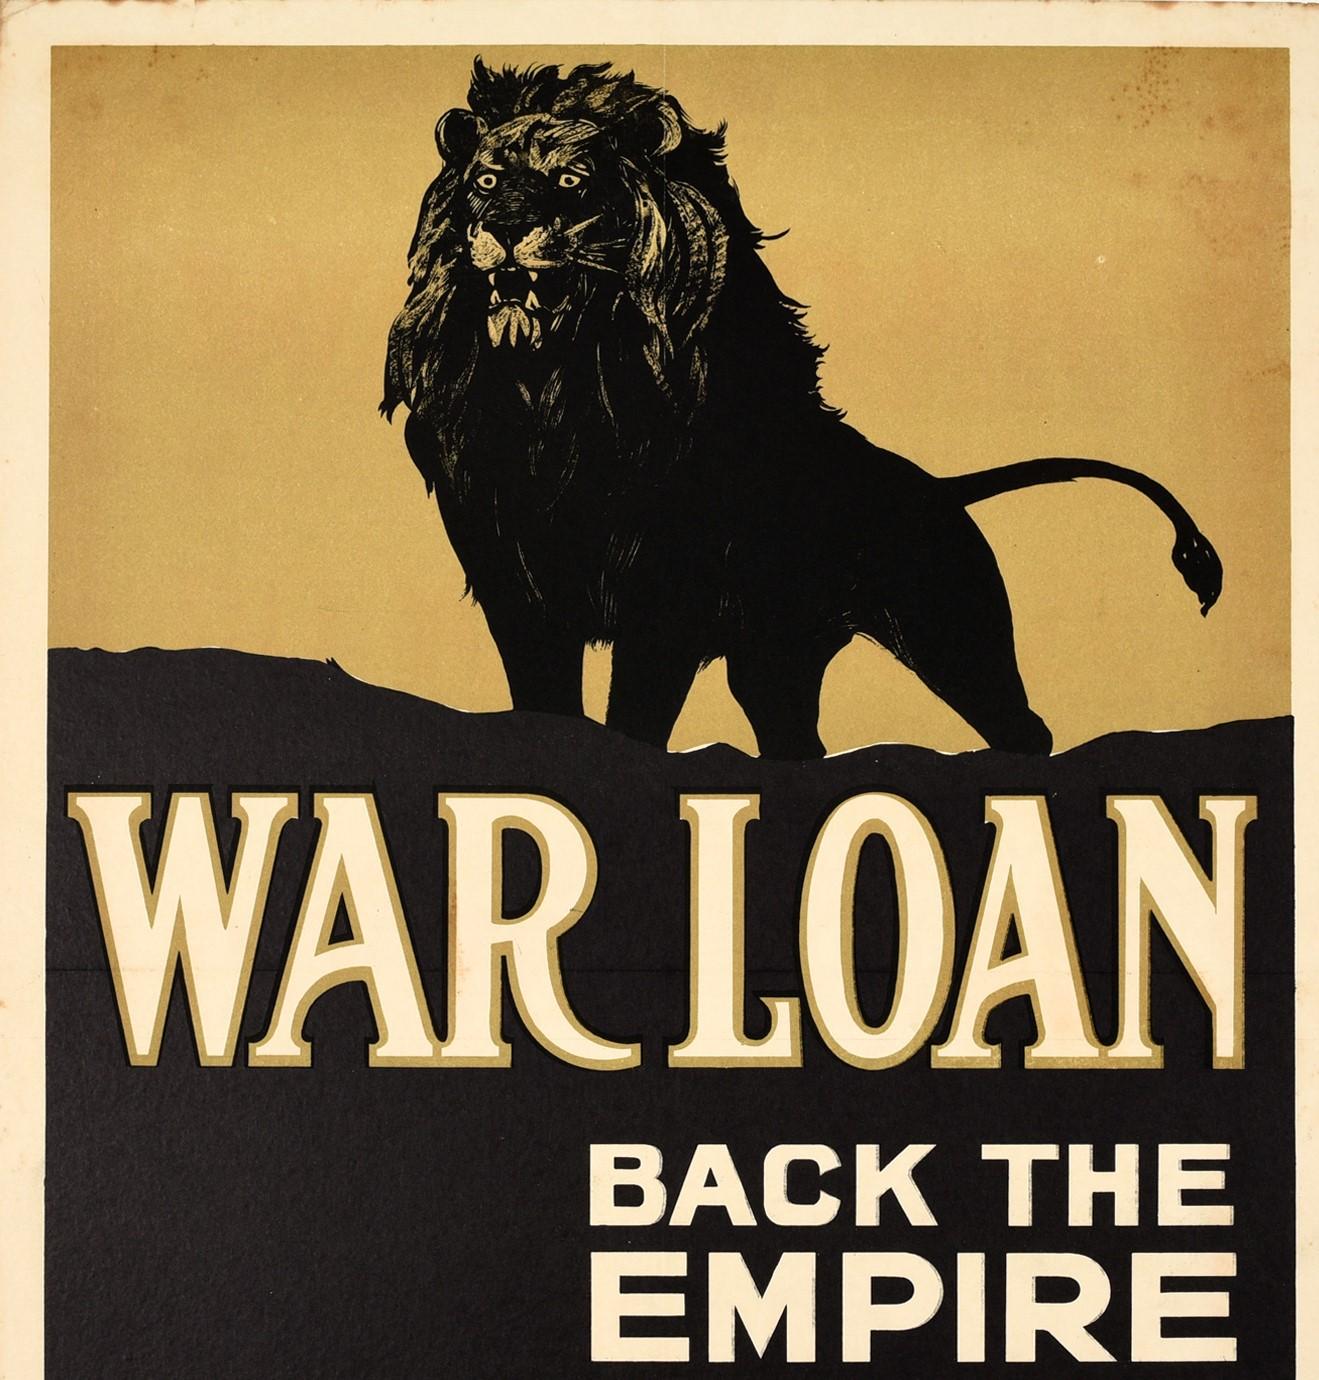 Original antique World War One poster issued by the Parliamentary War Savings Committee featuring a dynamic design depicting a lion standing on a hill above bold stylised lettering - War Loan Back the Empire With Your Savings Invest Now Apply for